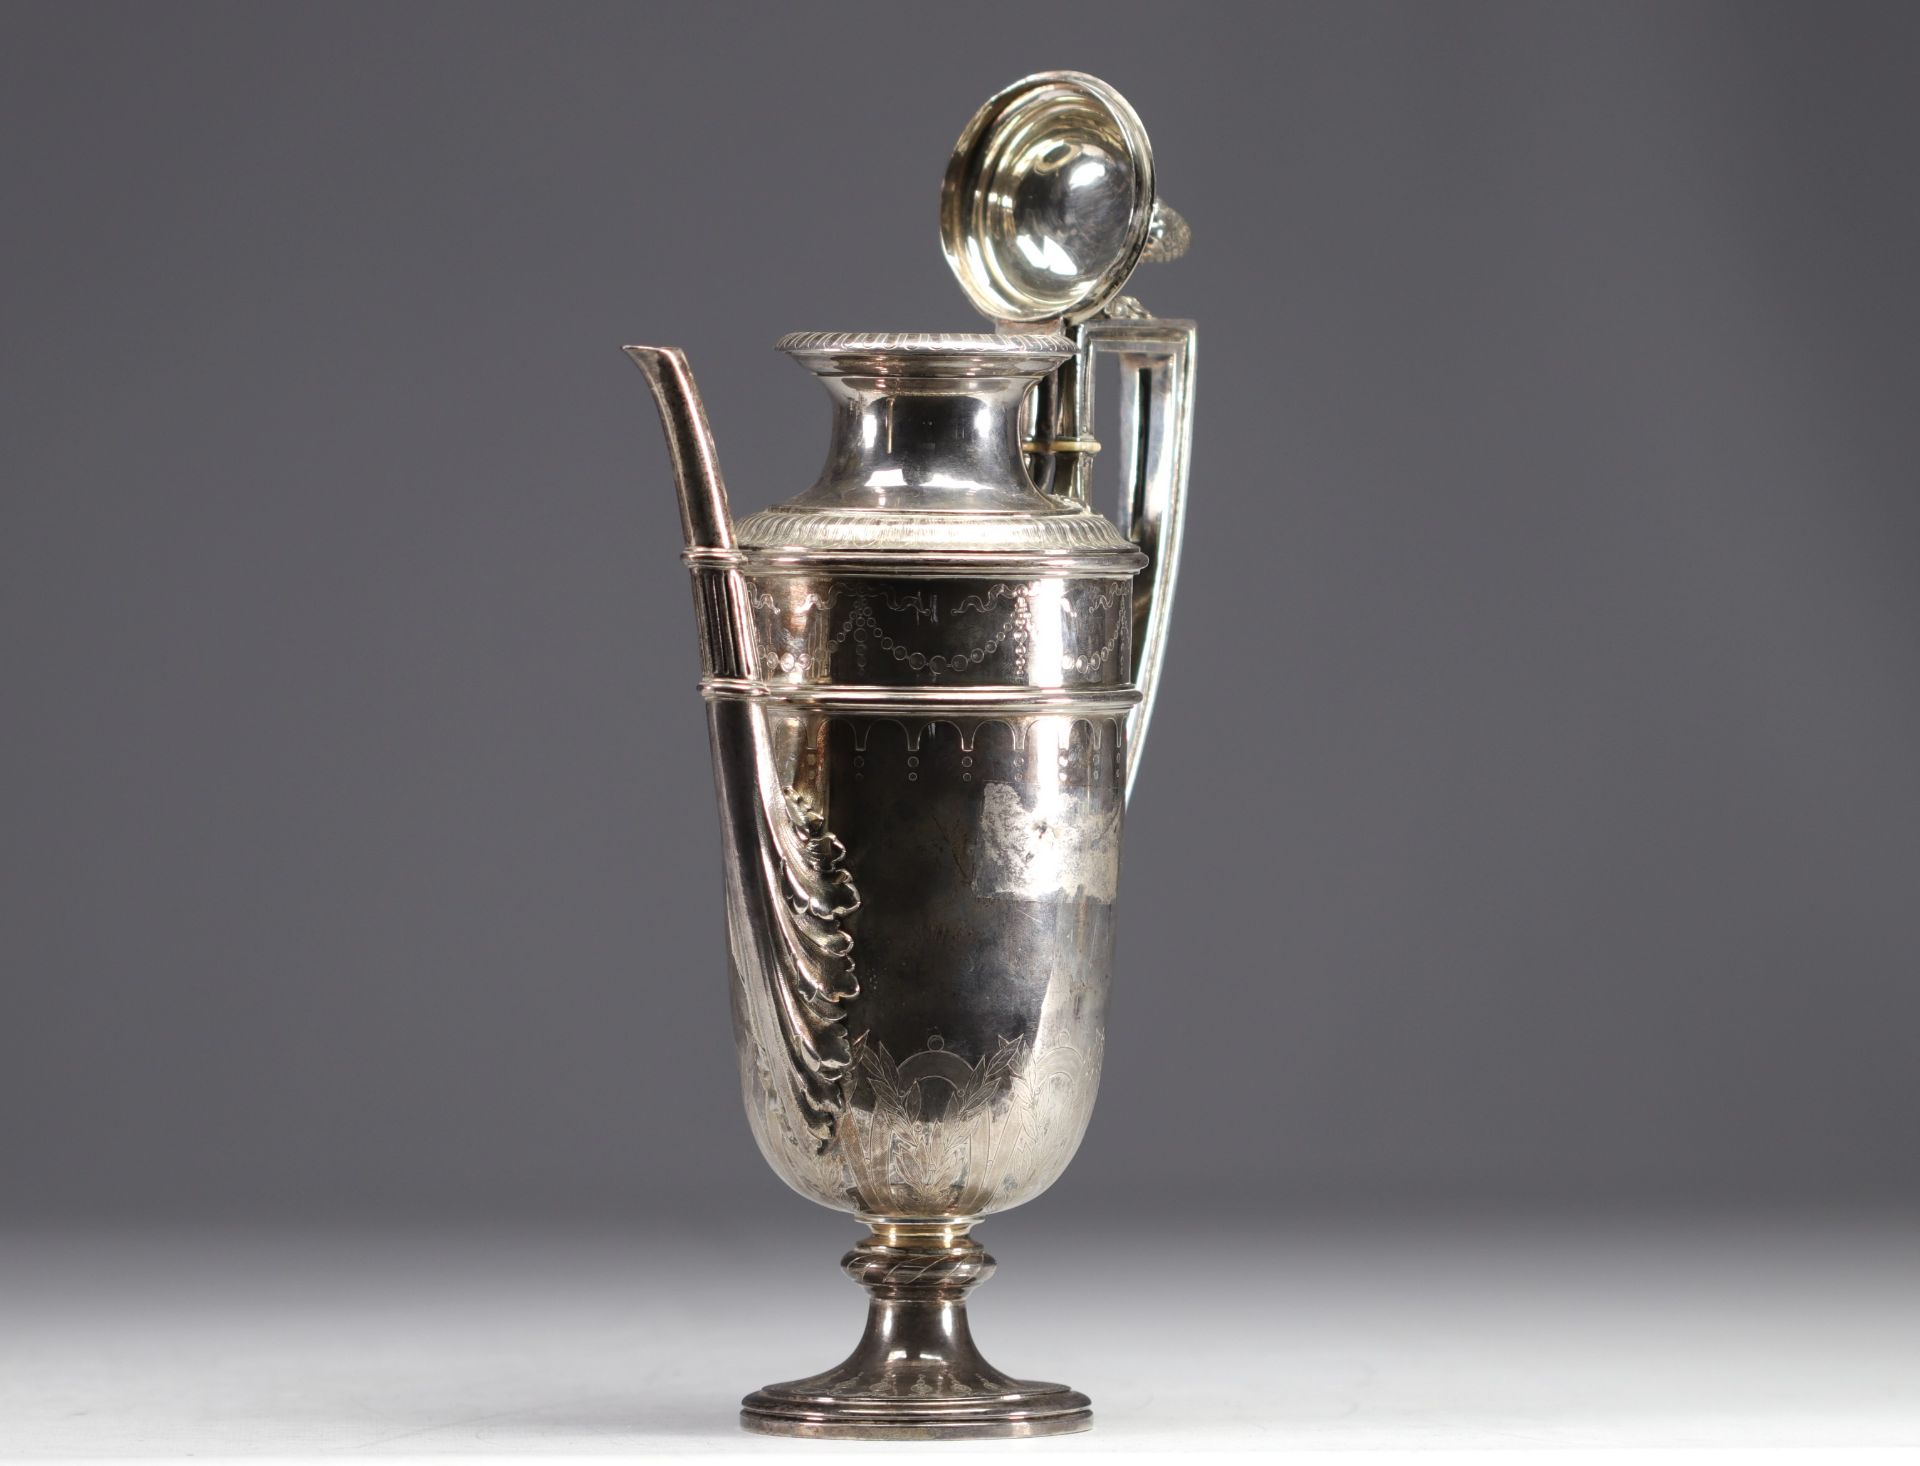 Jean-Baptiste Claude ODIOT a PARIS - Solid silver coffee service. - Image 8 of 11